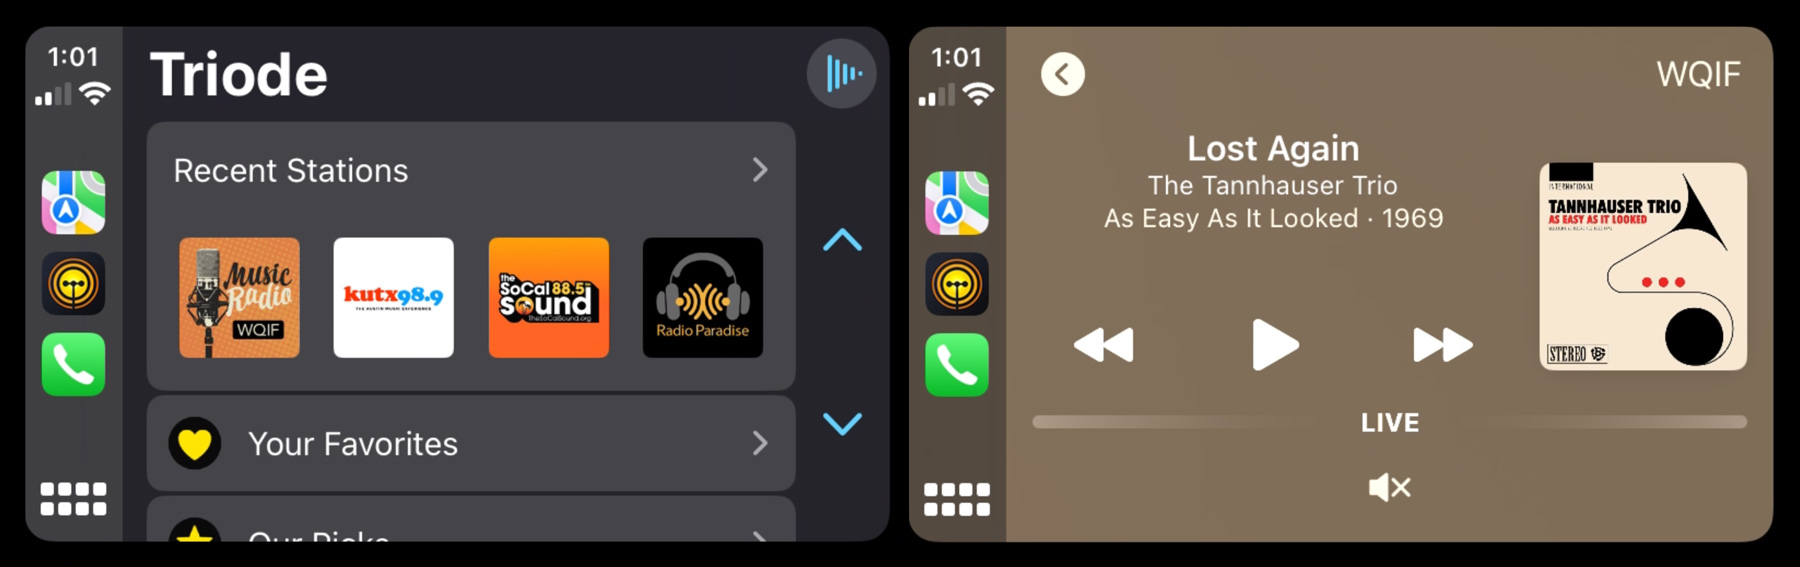 Triode CarPlay interface showing Recent stations and Now Playing